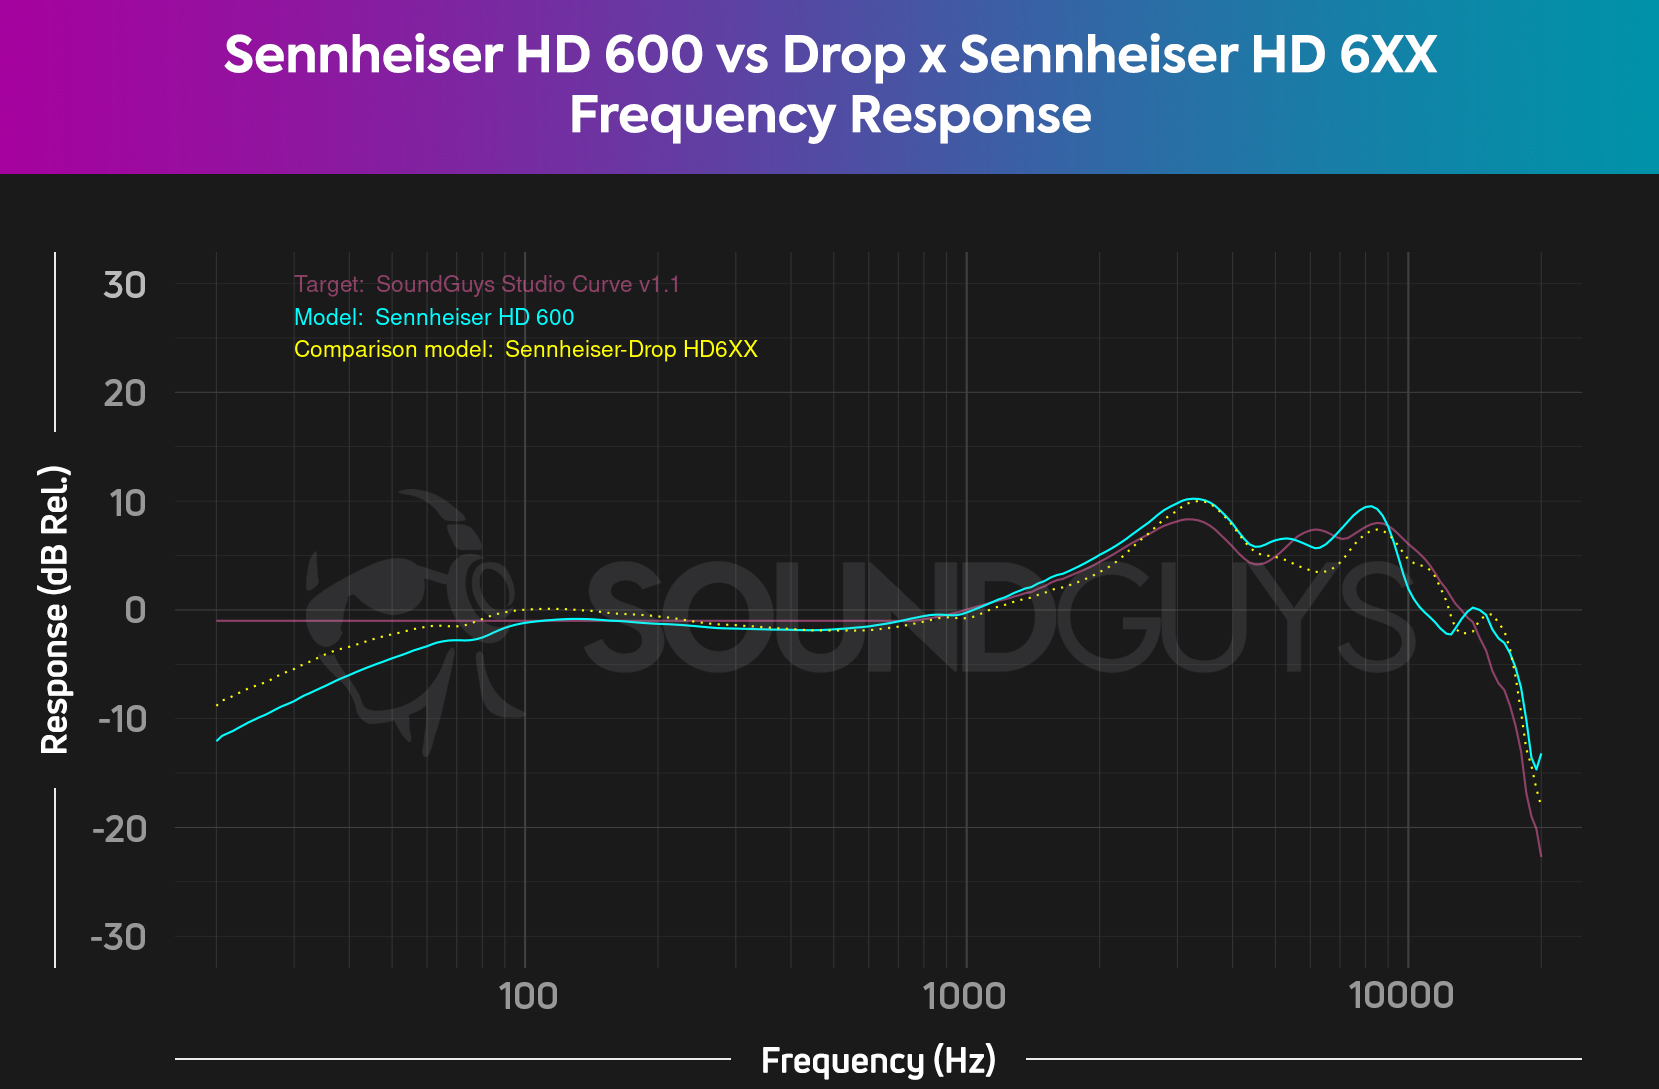 For those looking for a more inexpensive headset, the Drop x Sennheiser HD 6XX is very comparable to the Sennheiser HD 600.